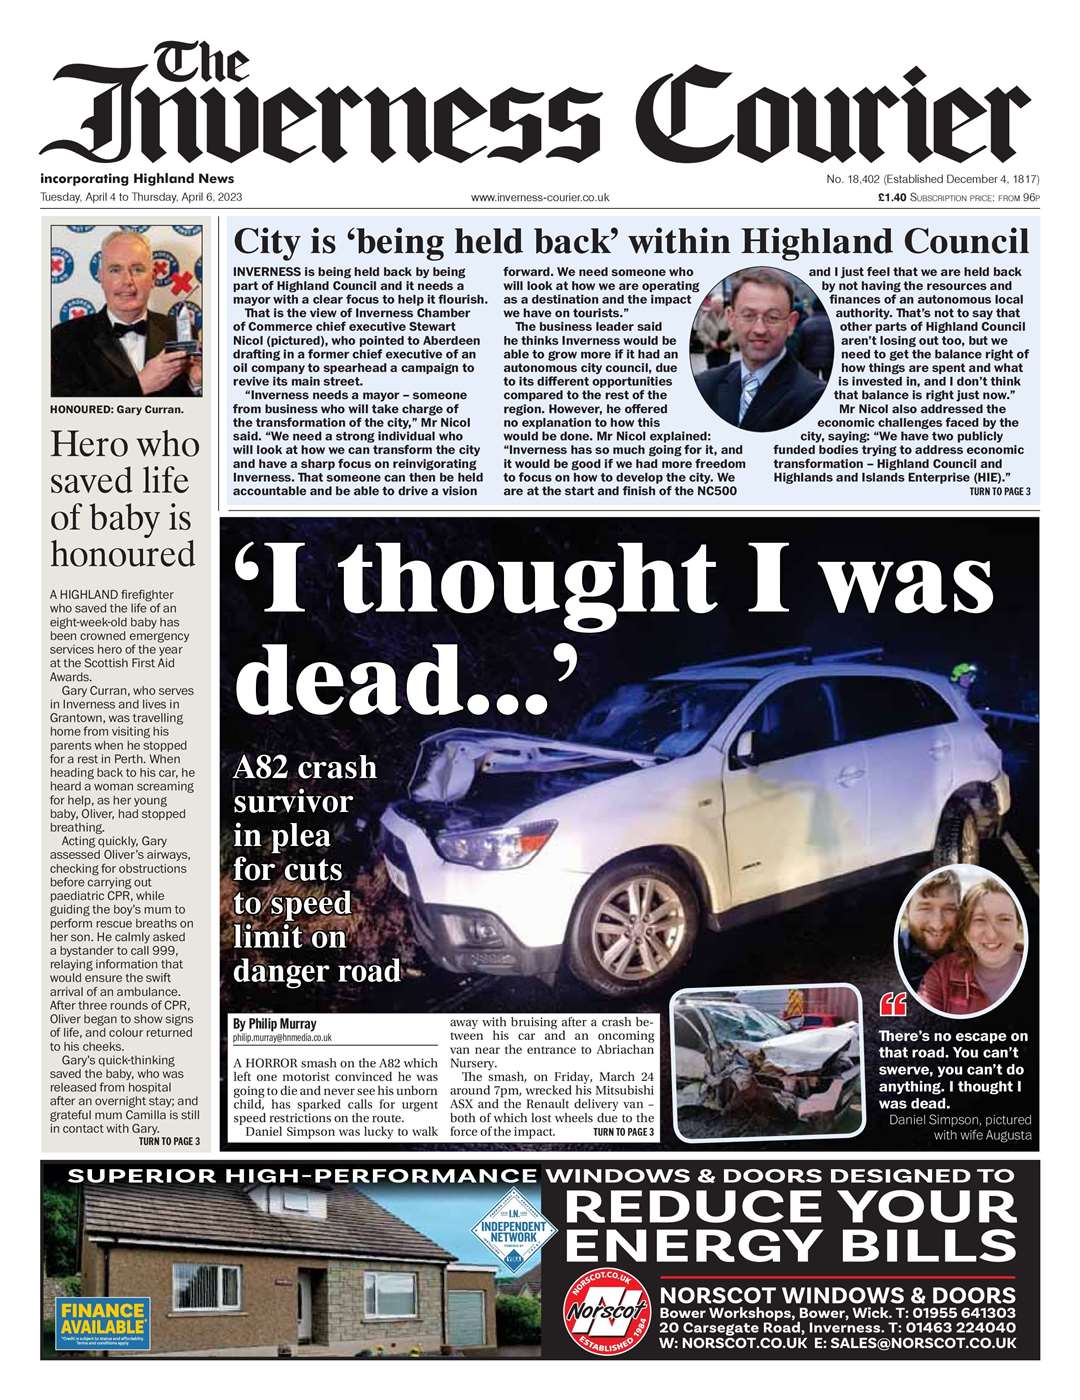 The Inverness Courier, April 4, front page.